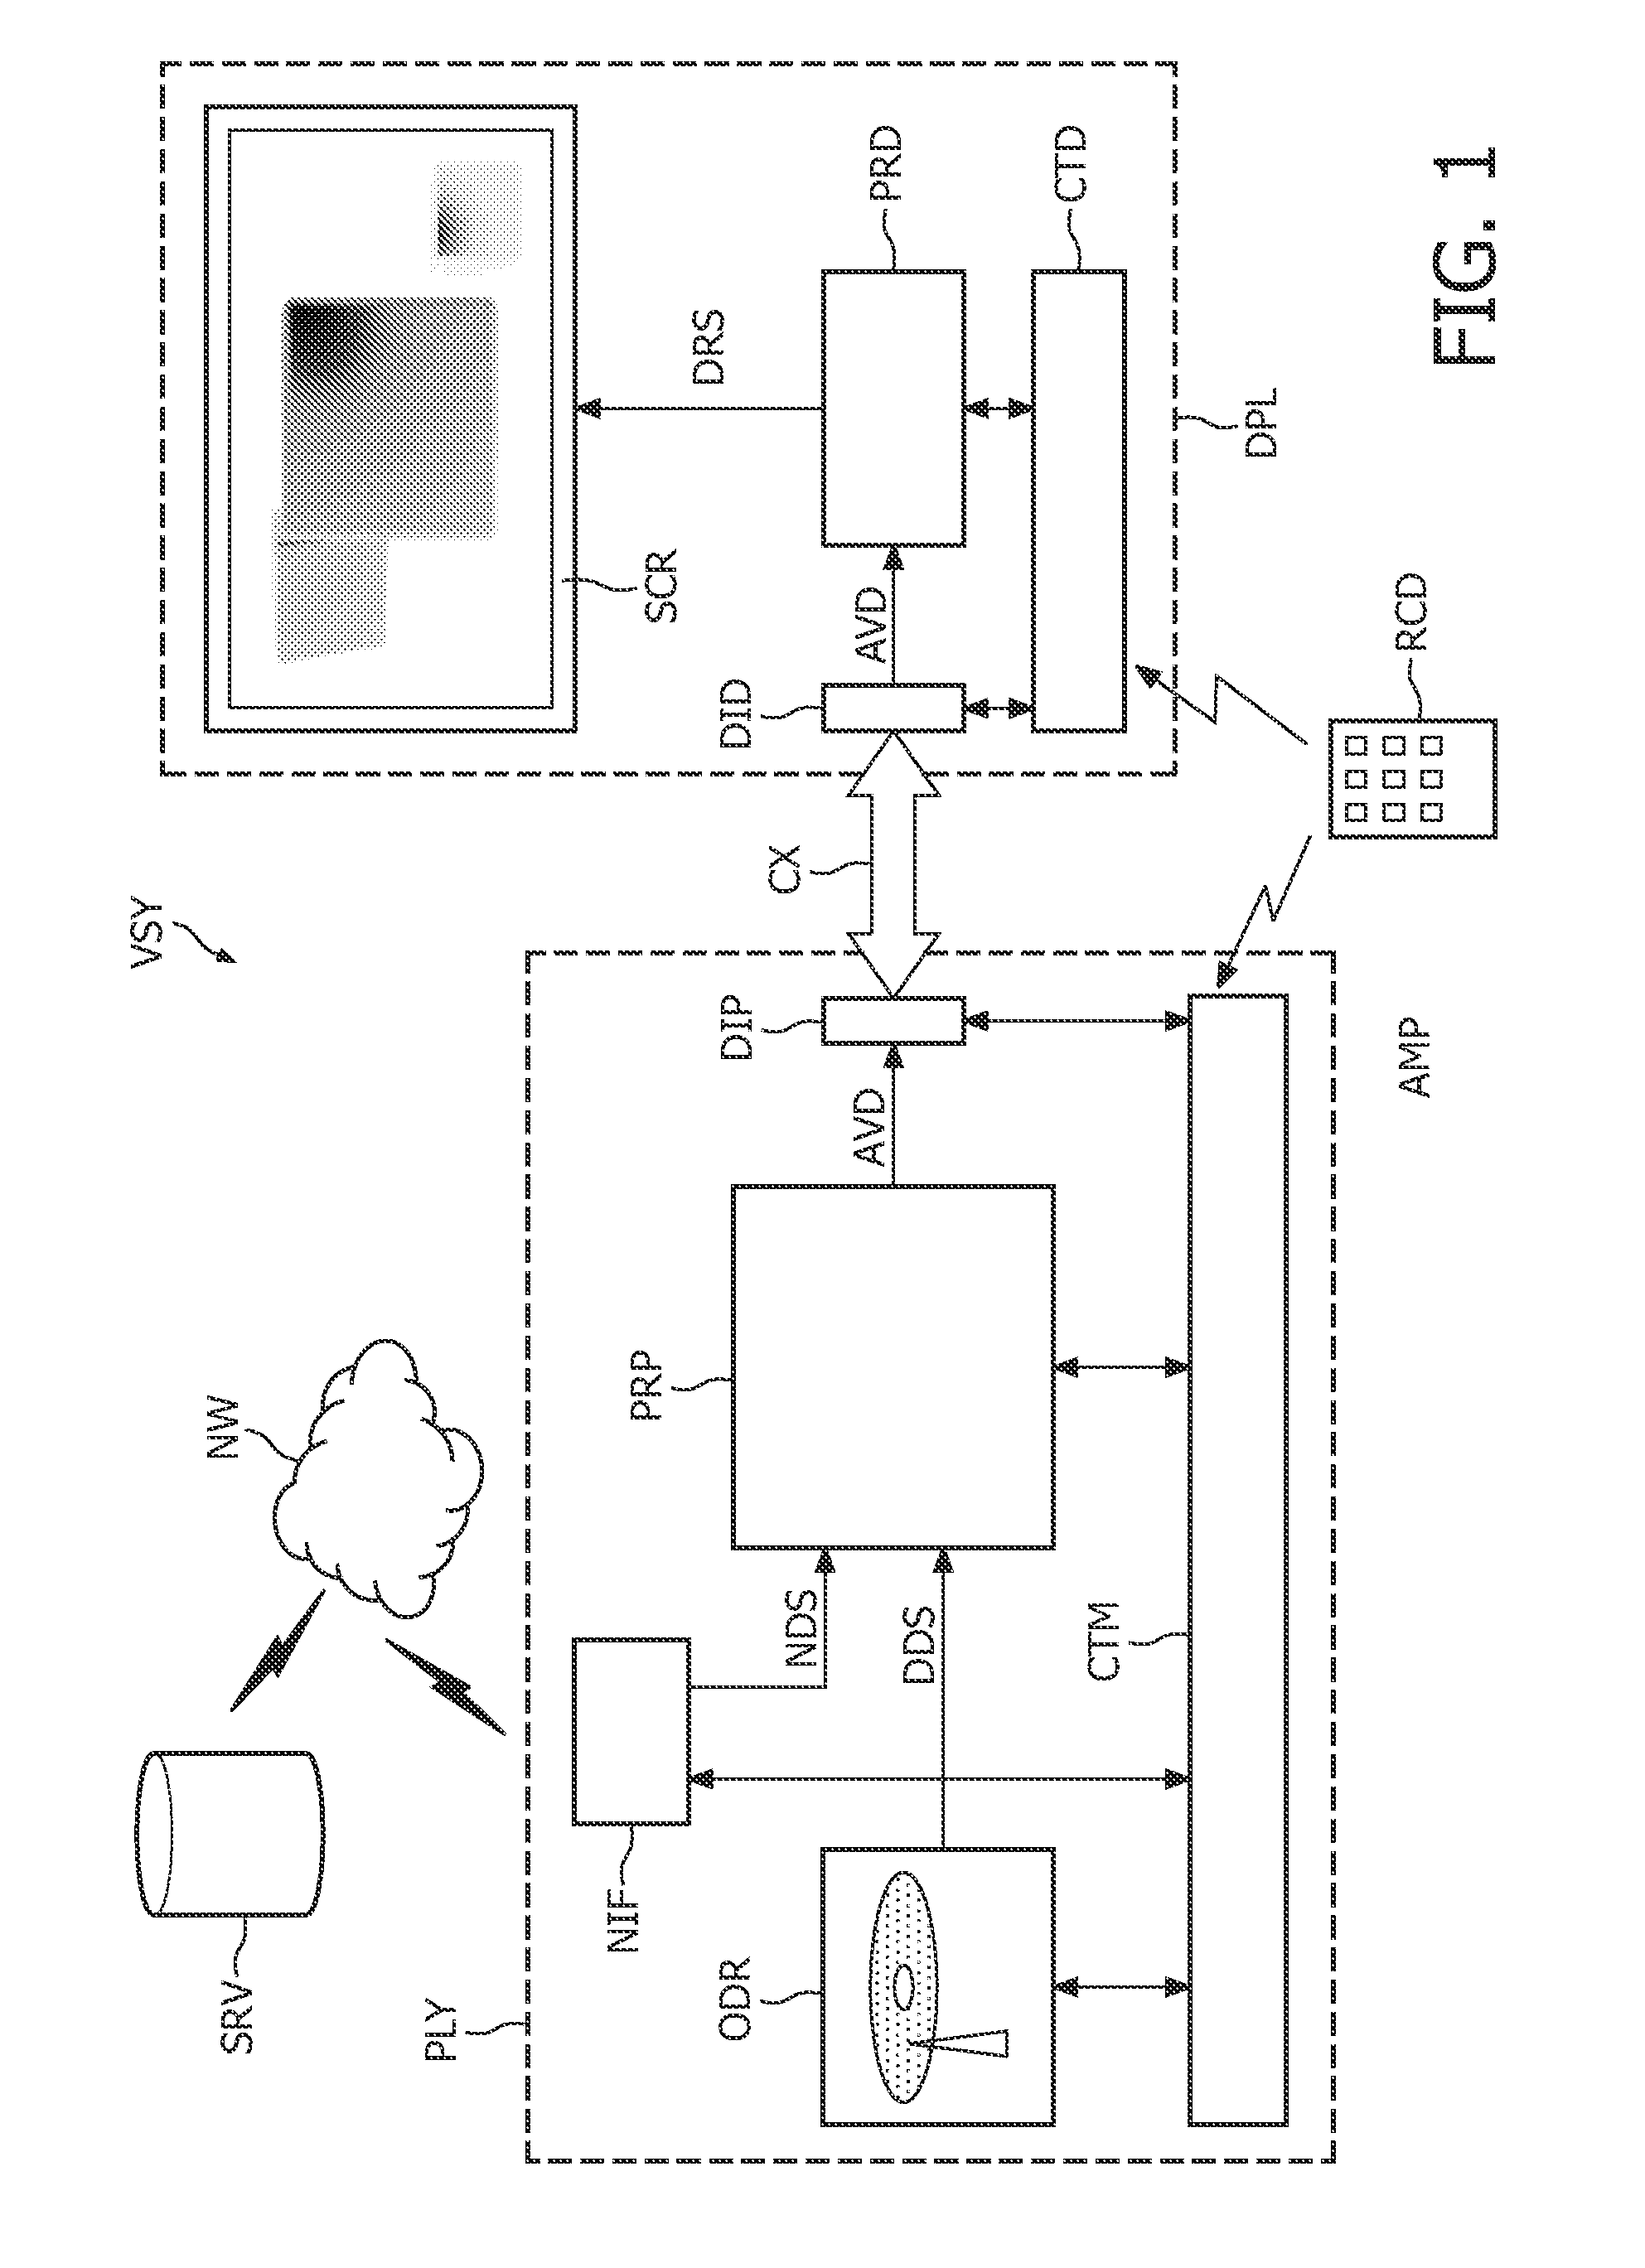 Image processor for overlaying a graphics object